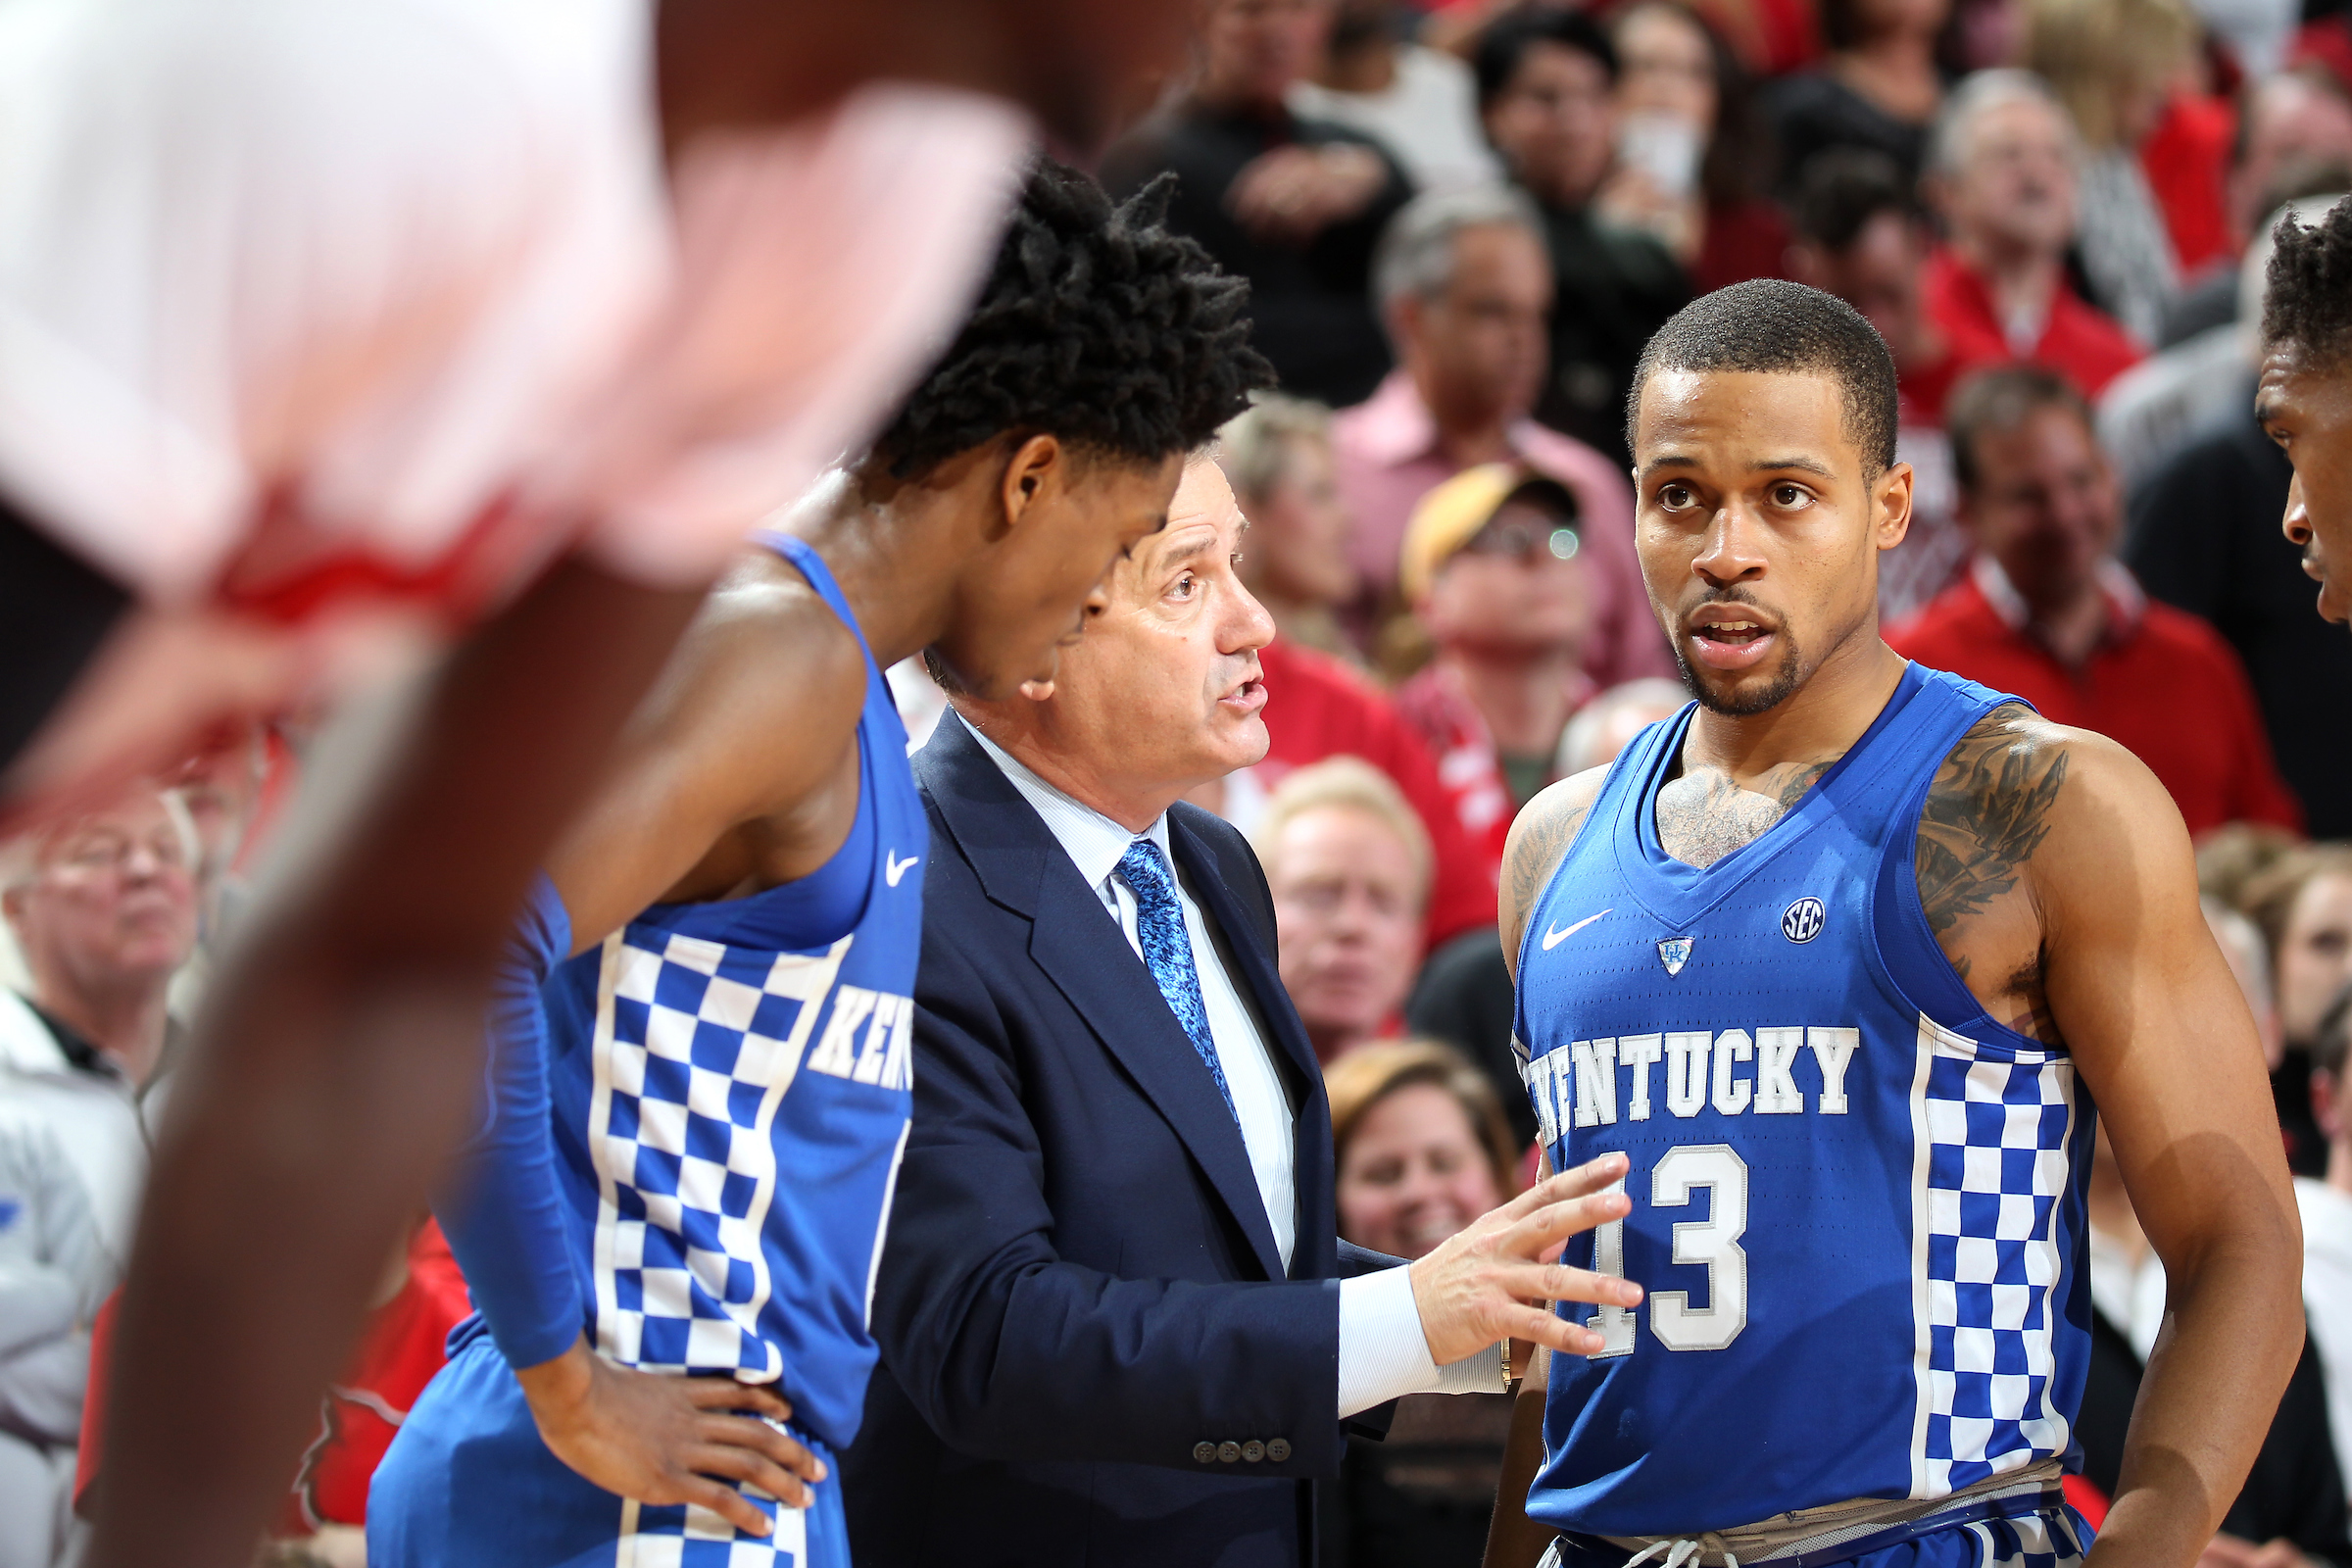 Shifting Gears: UK Working on Half-Court Offense